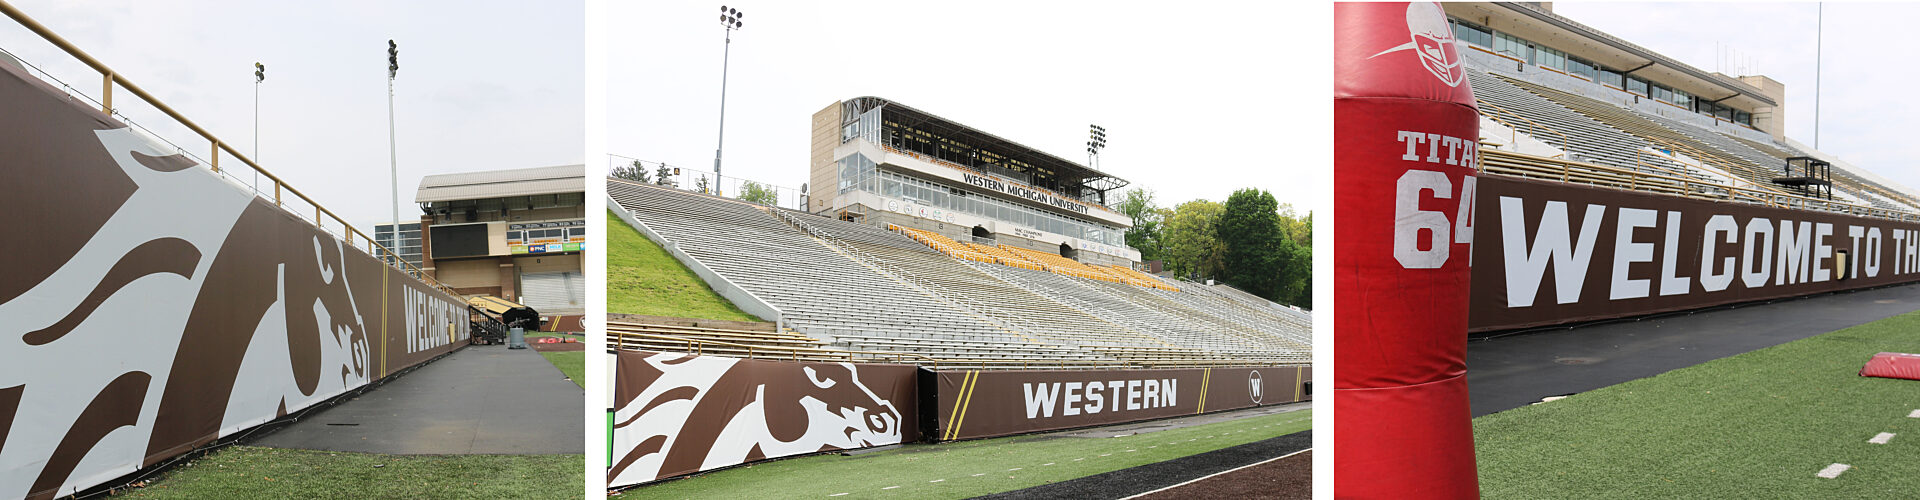 Large banners with Western Michigan University's mascot on them in front of stadium seats